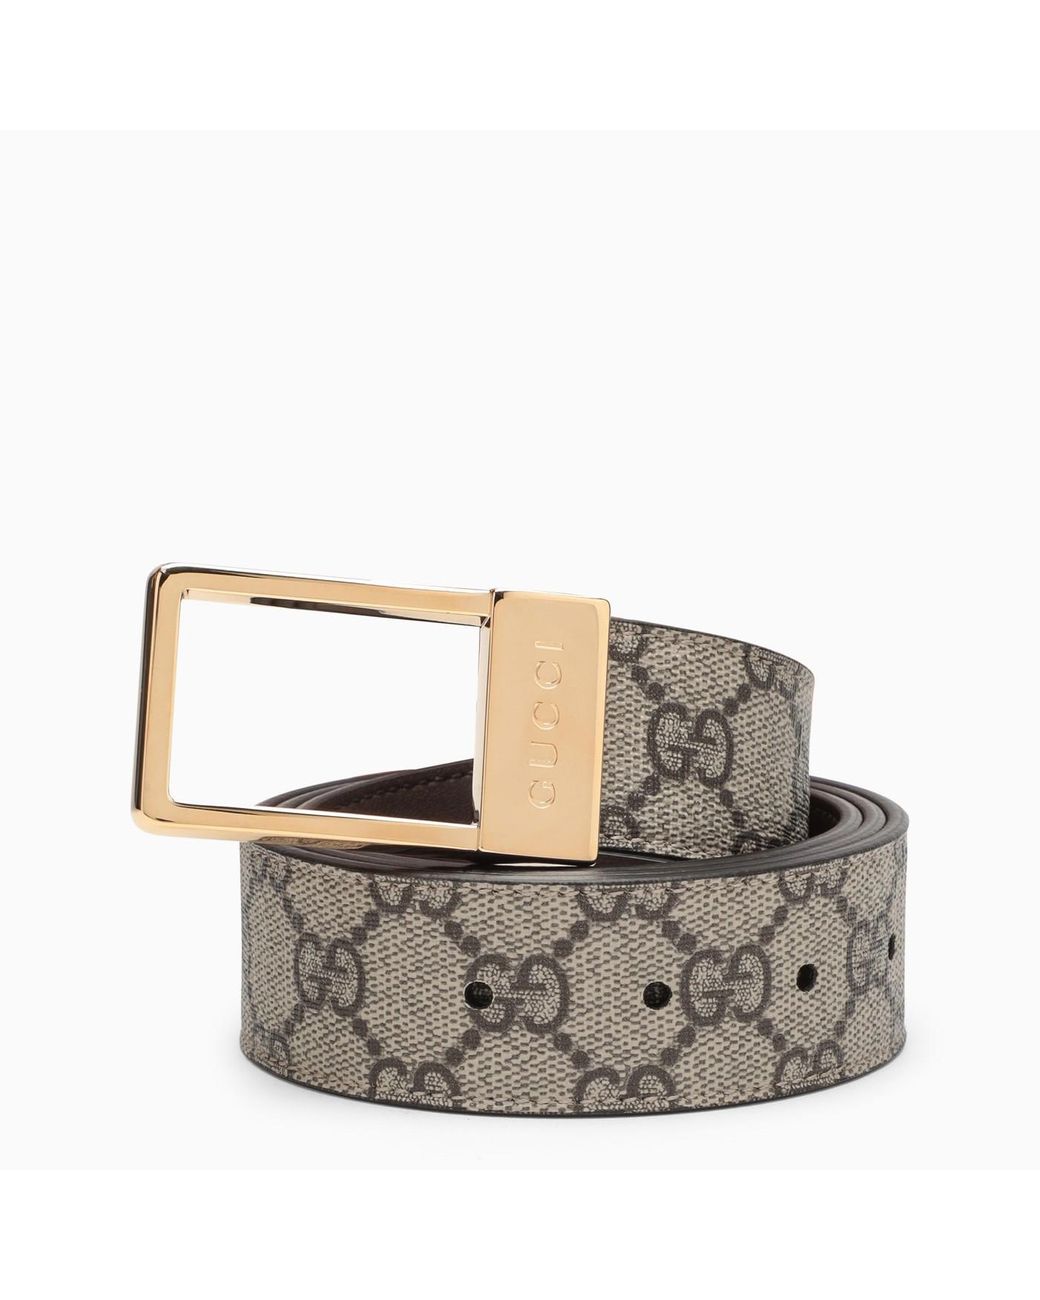 Gucci GG Marmont Caiman Belt with Shiny Buckle